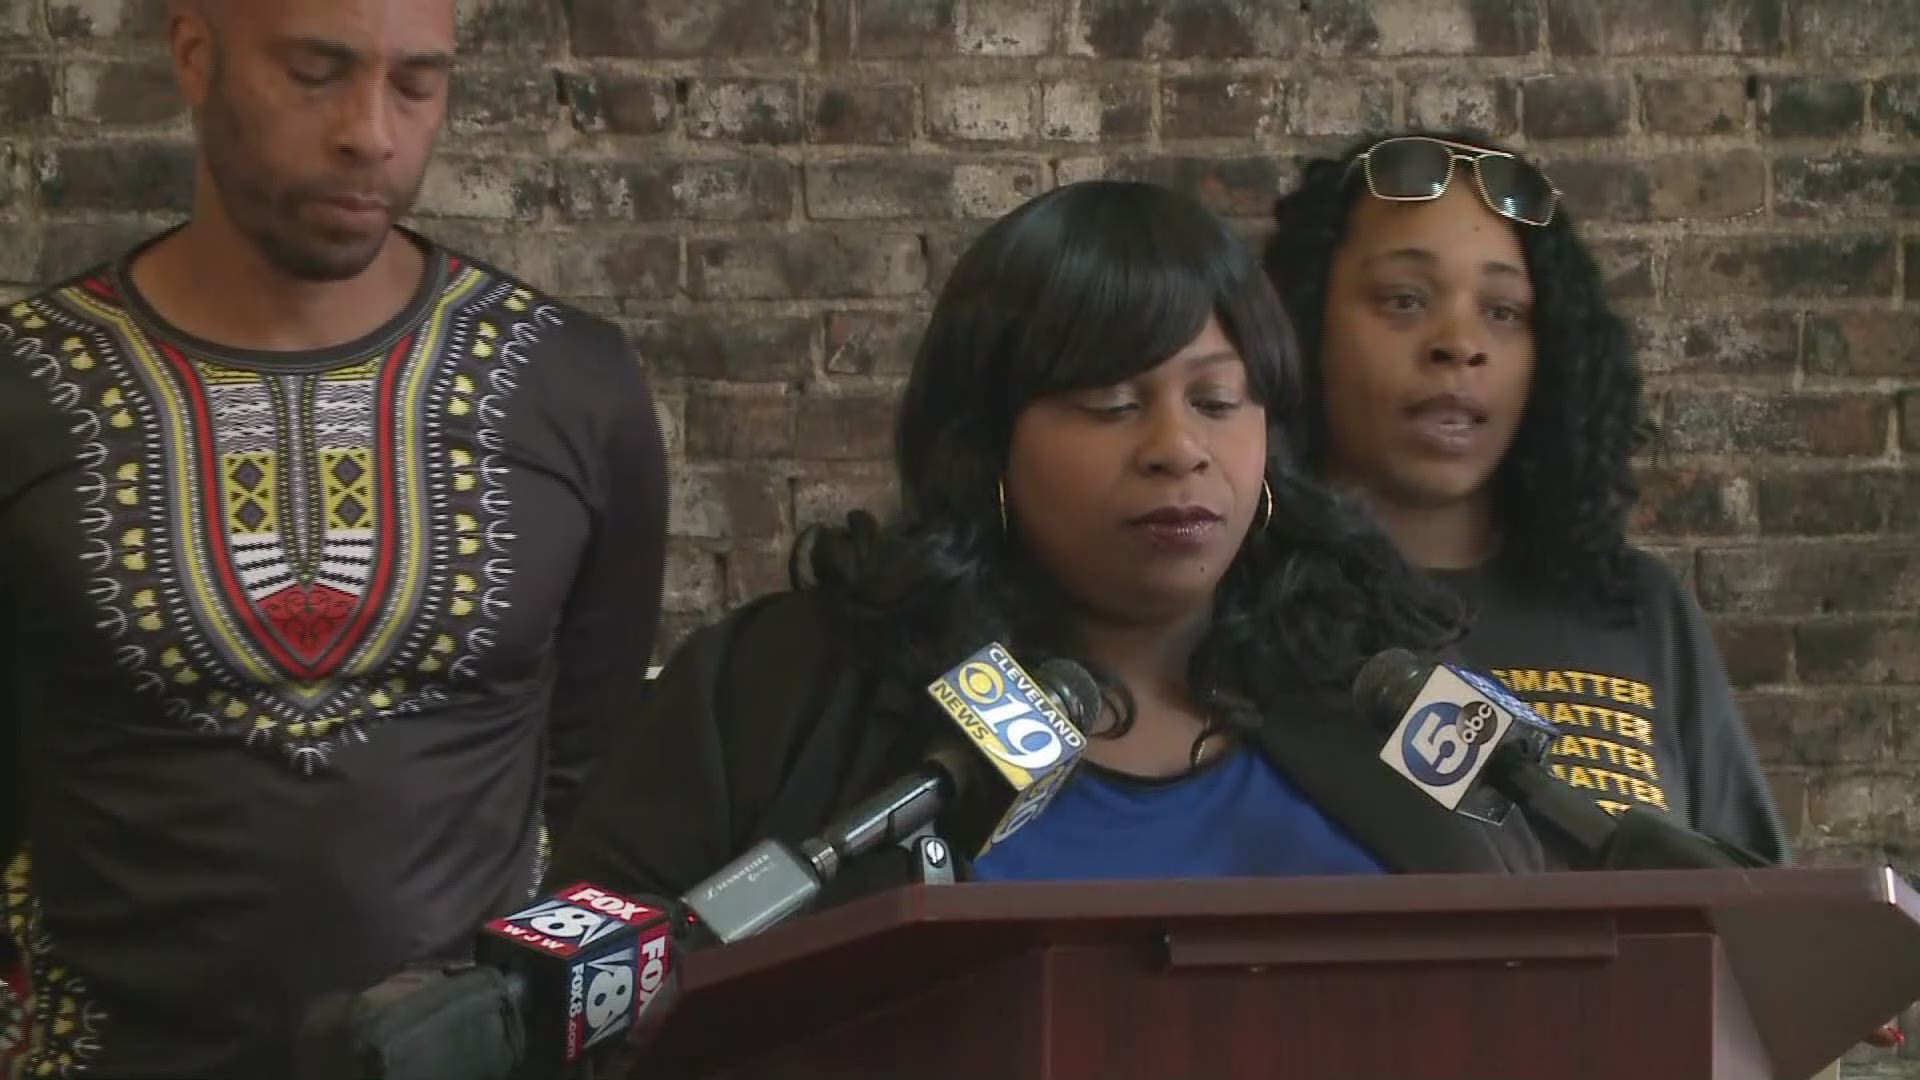 Samaria RIce holds press conference after officer who shot her son withdraws police application in Bellaire